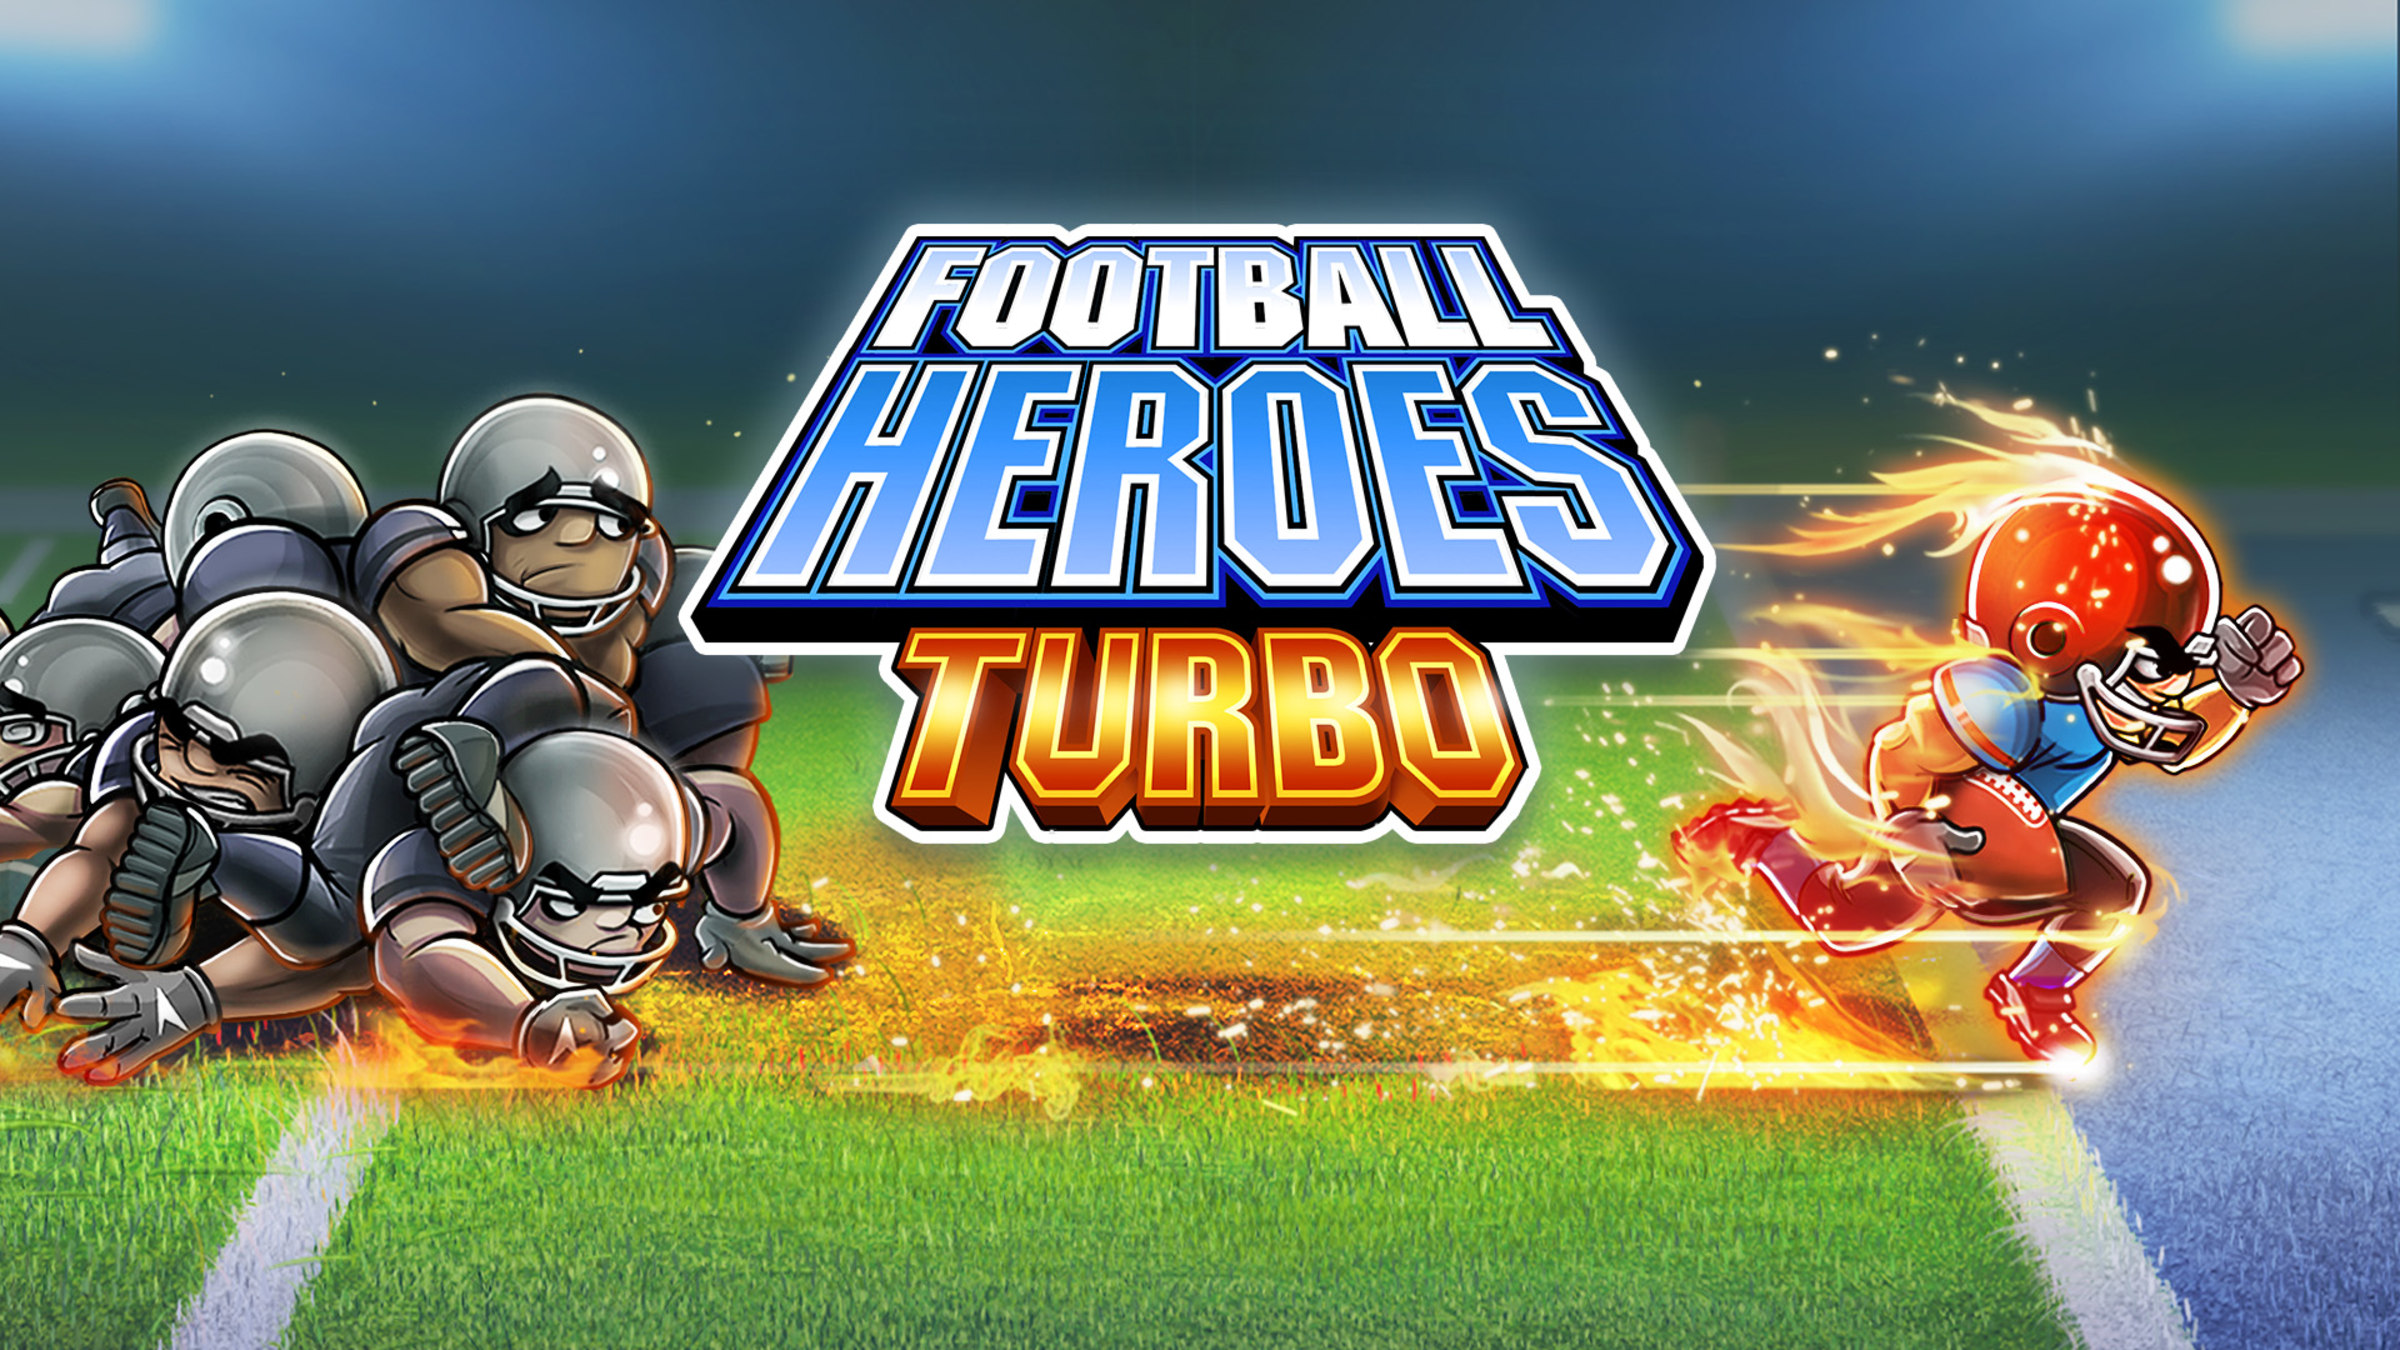 Football Heroes Turbo for Nintendo Switch Nintendo Official Site